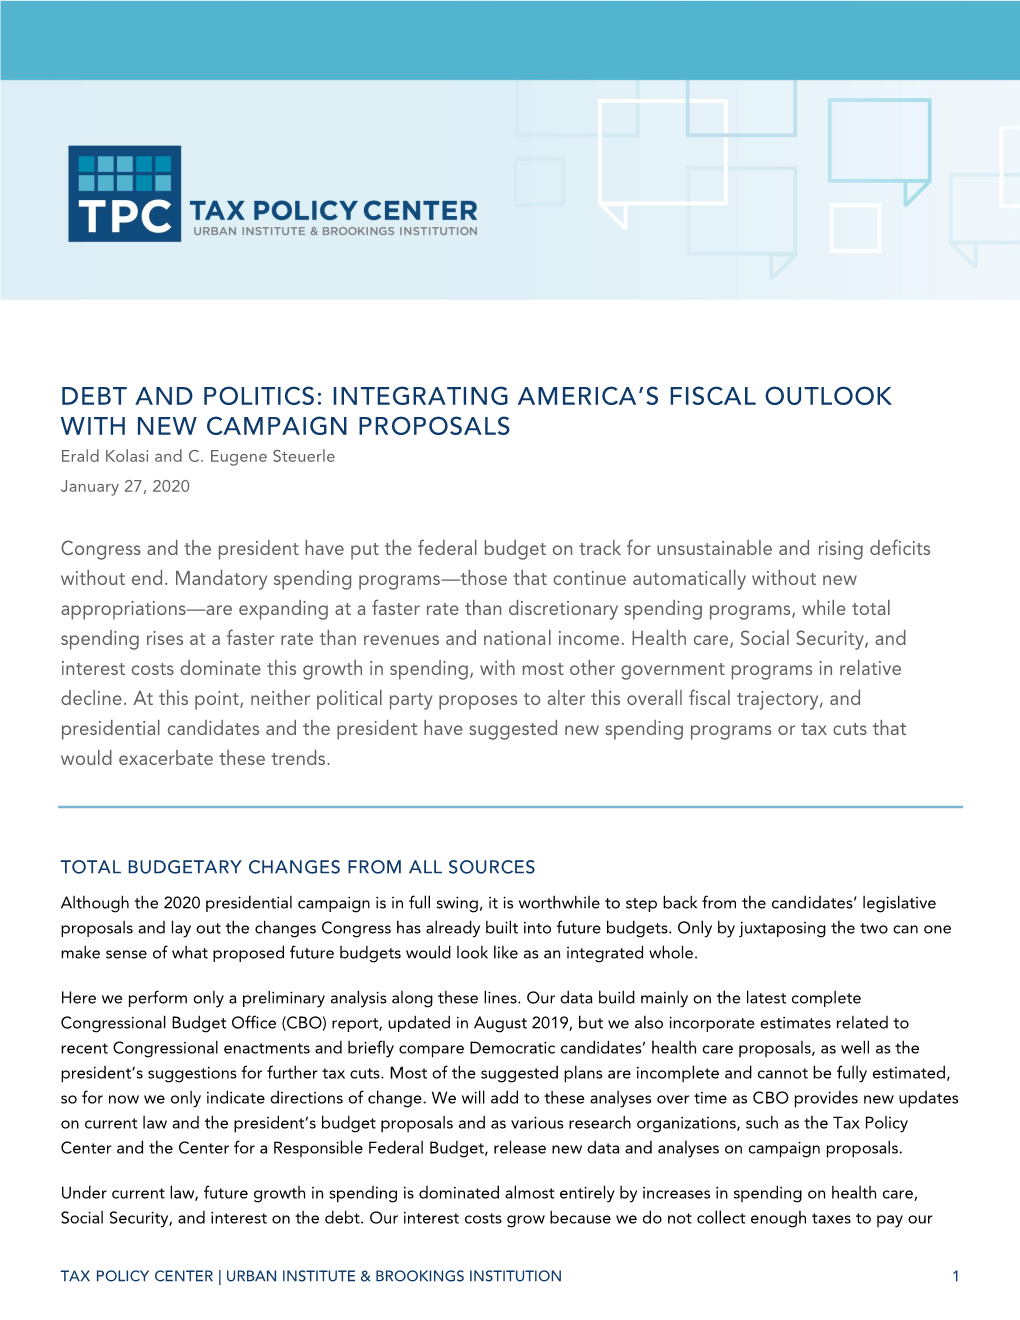 Debt and Politics: Integrating America's Fiscal Outlook